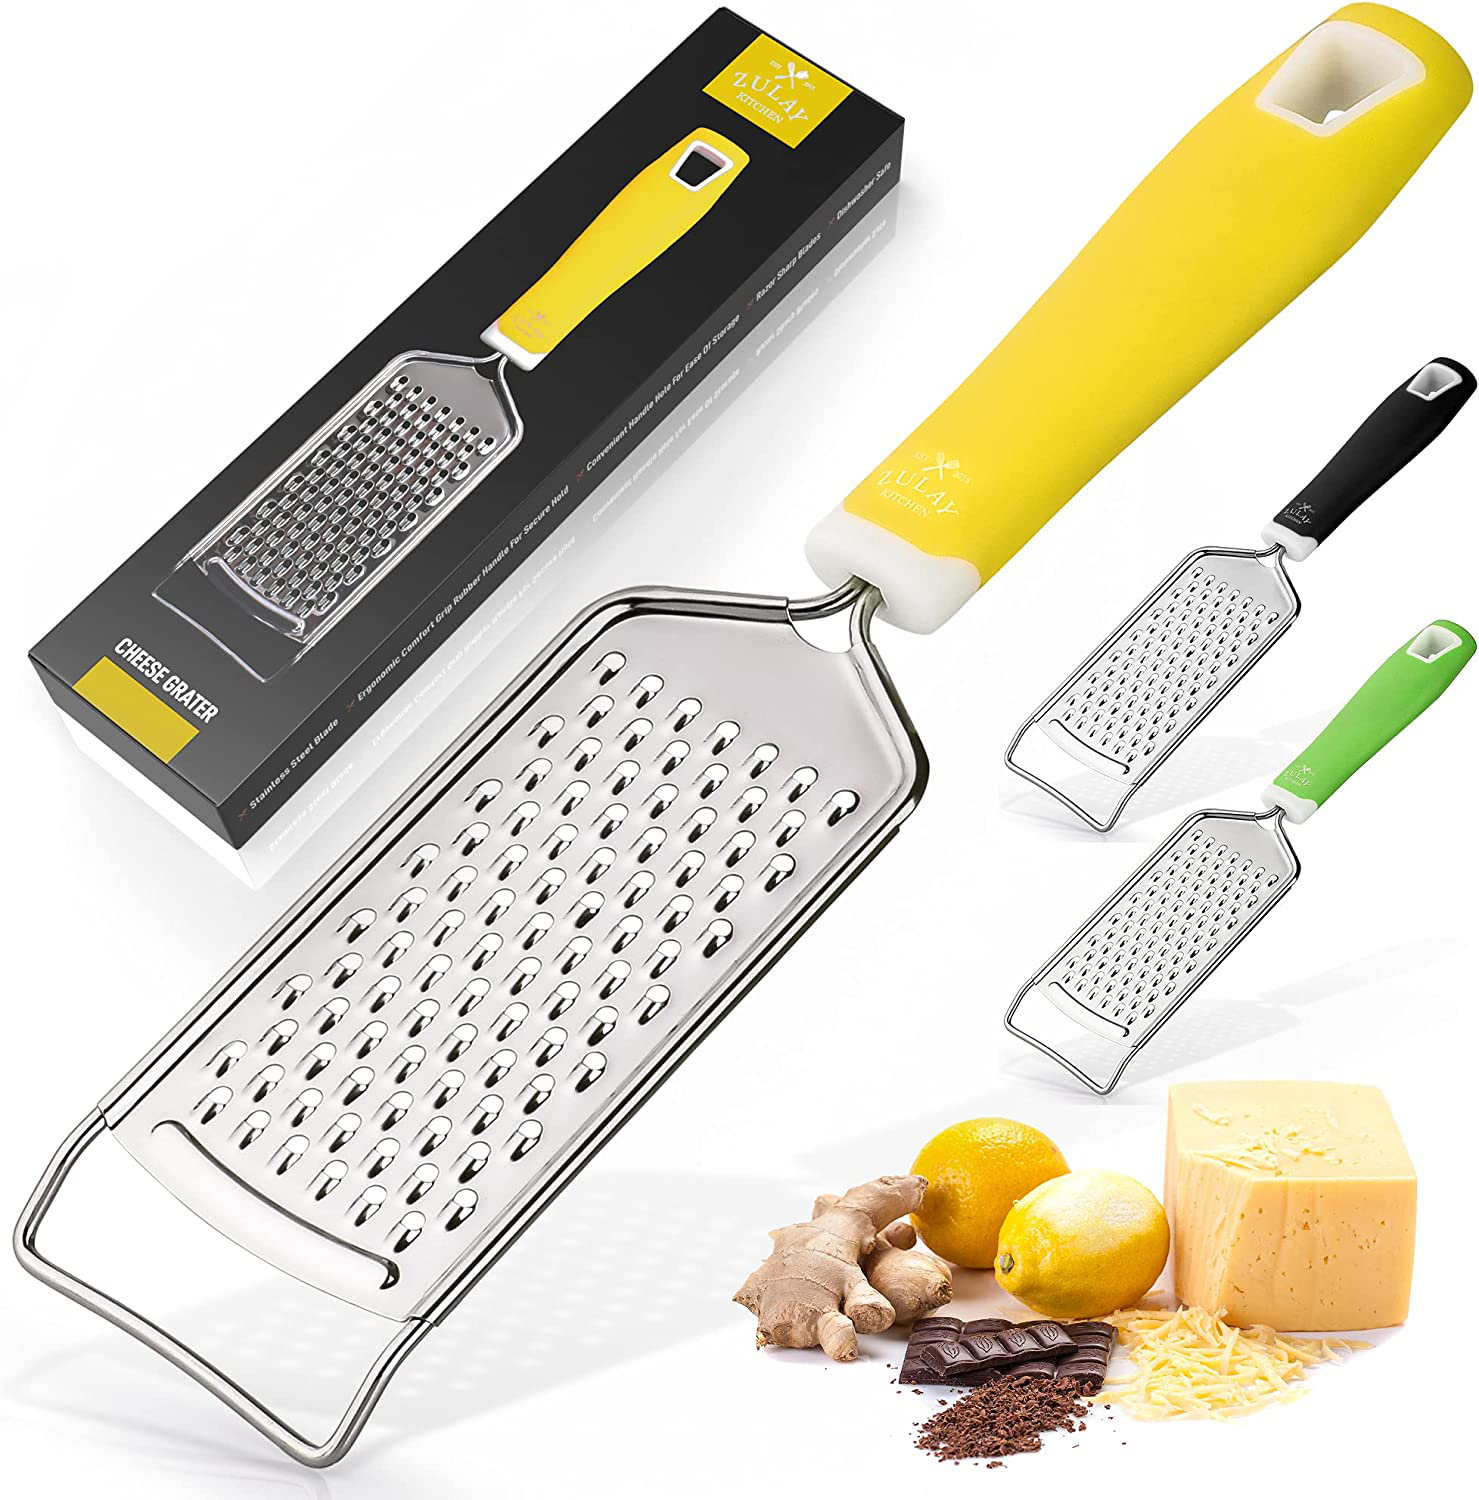 5 Unexpected Ways to Use a Cheese Grater